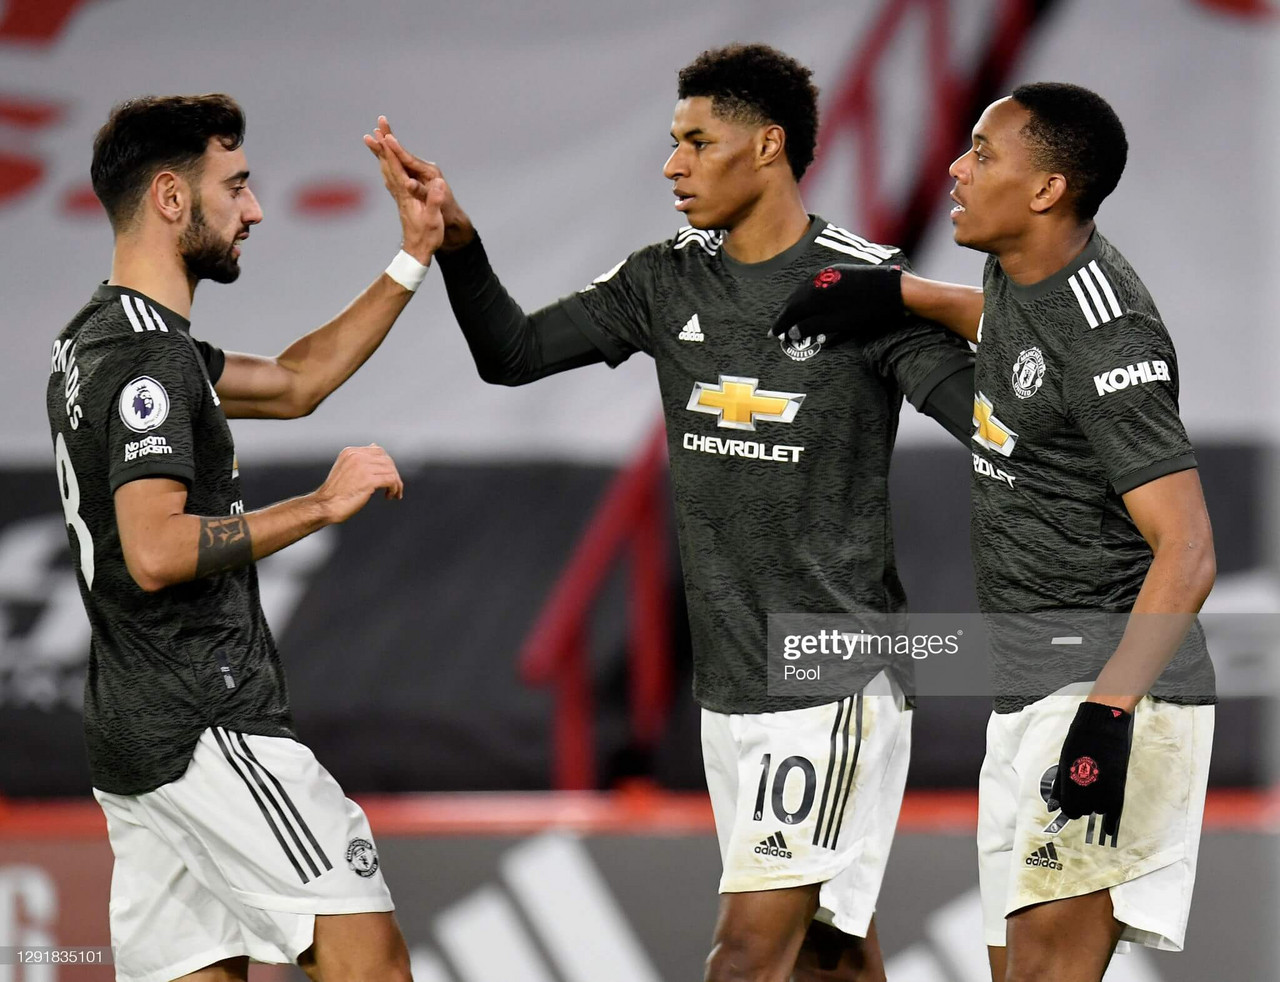 Sheffield United 2-3 Manchester United: Rashford at the double as United climb the table